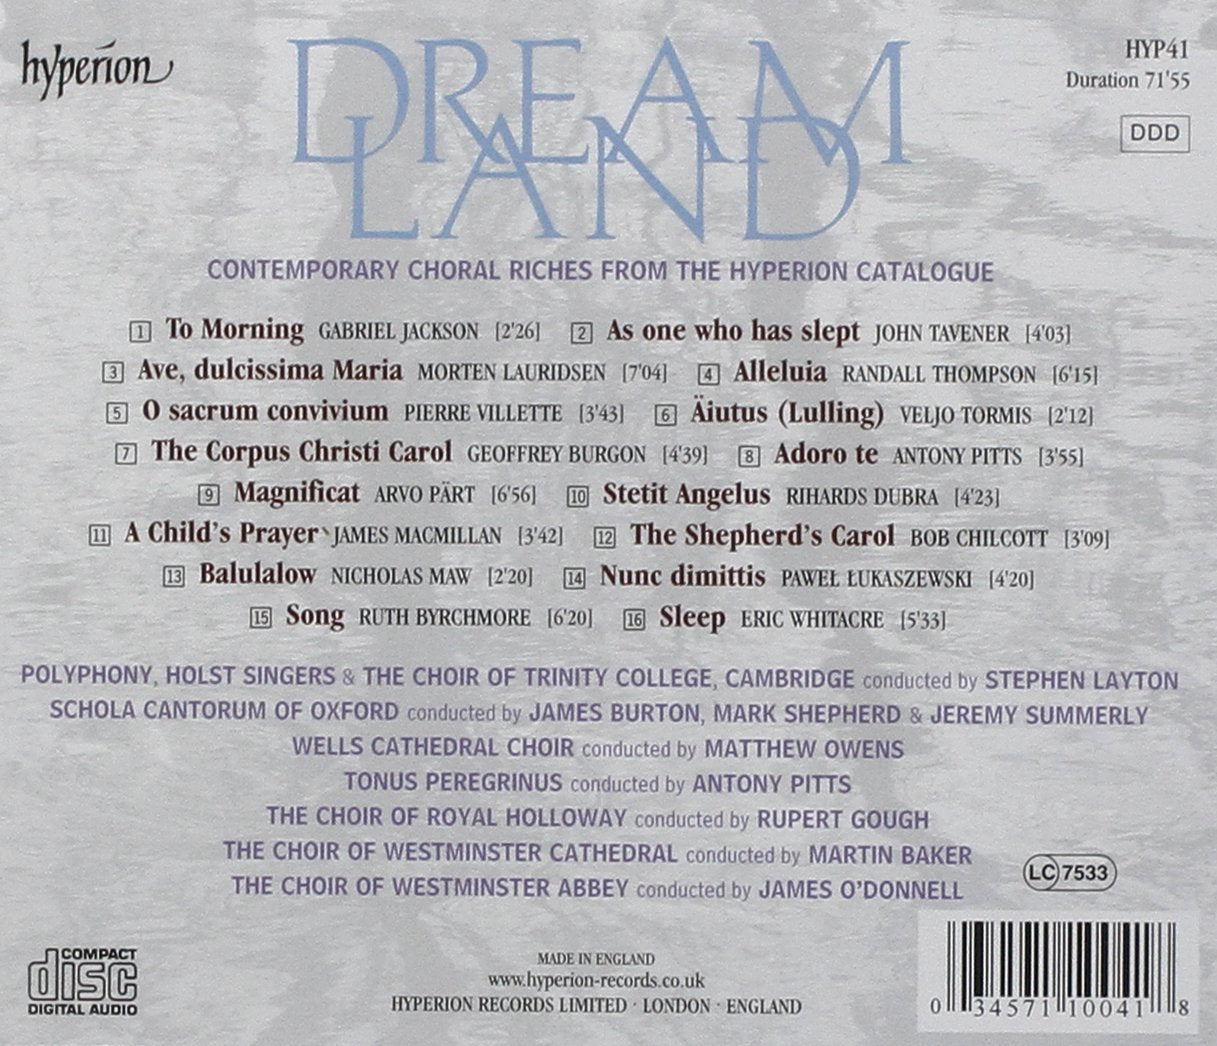 DREAMLAND - Contemporary Choral Riches from the Hyperion Catalogue